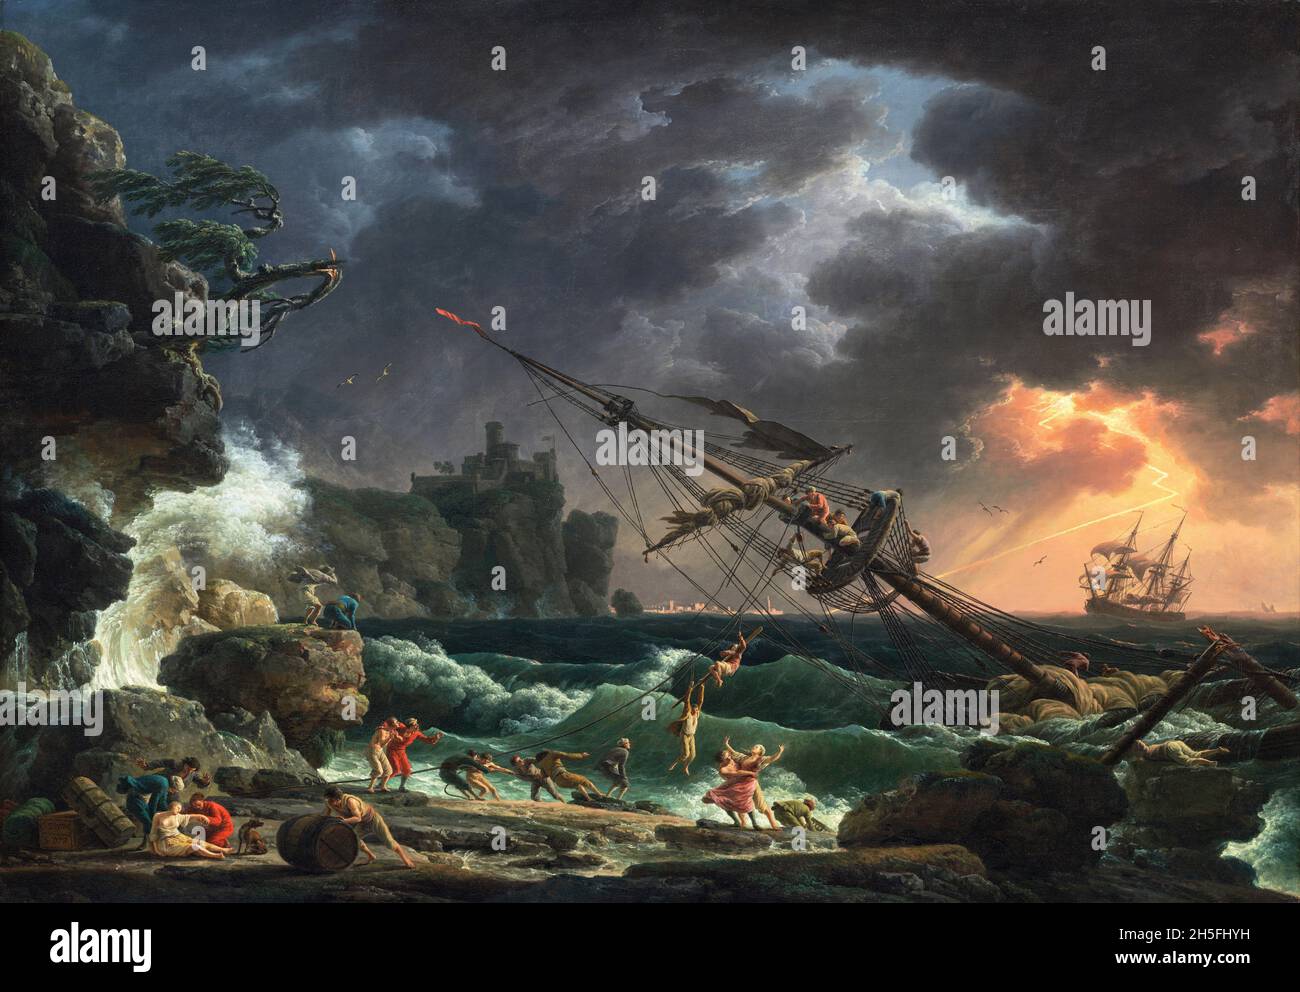 The Shipwreck by Claude-Joseph Vernet (1714-1789), oil on canvas, 1772 Stock Photo